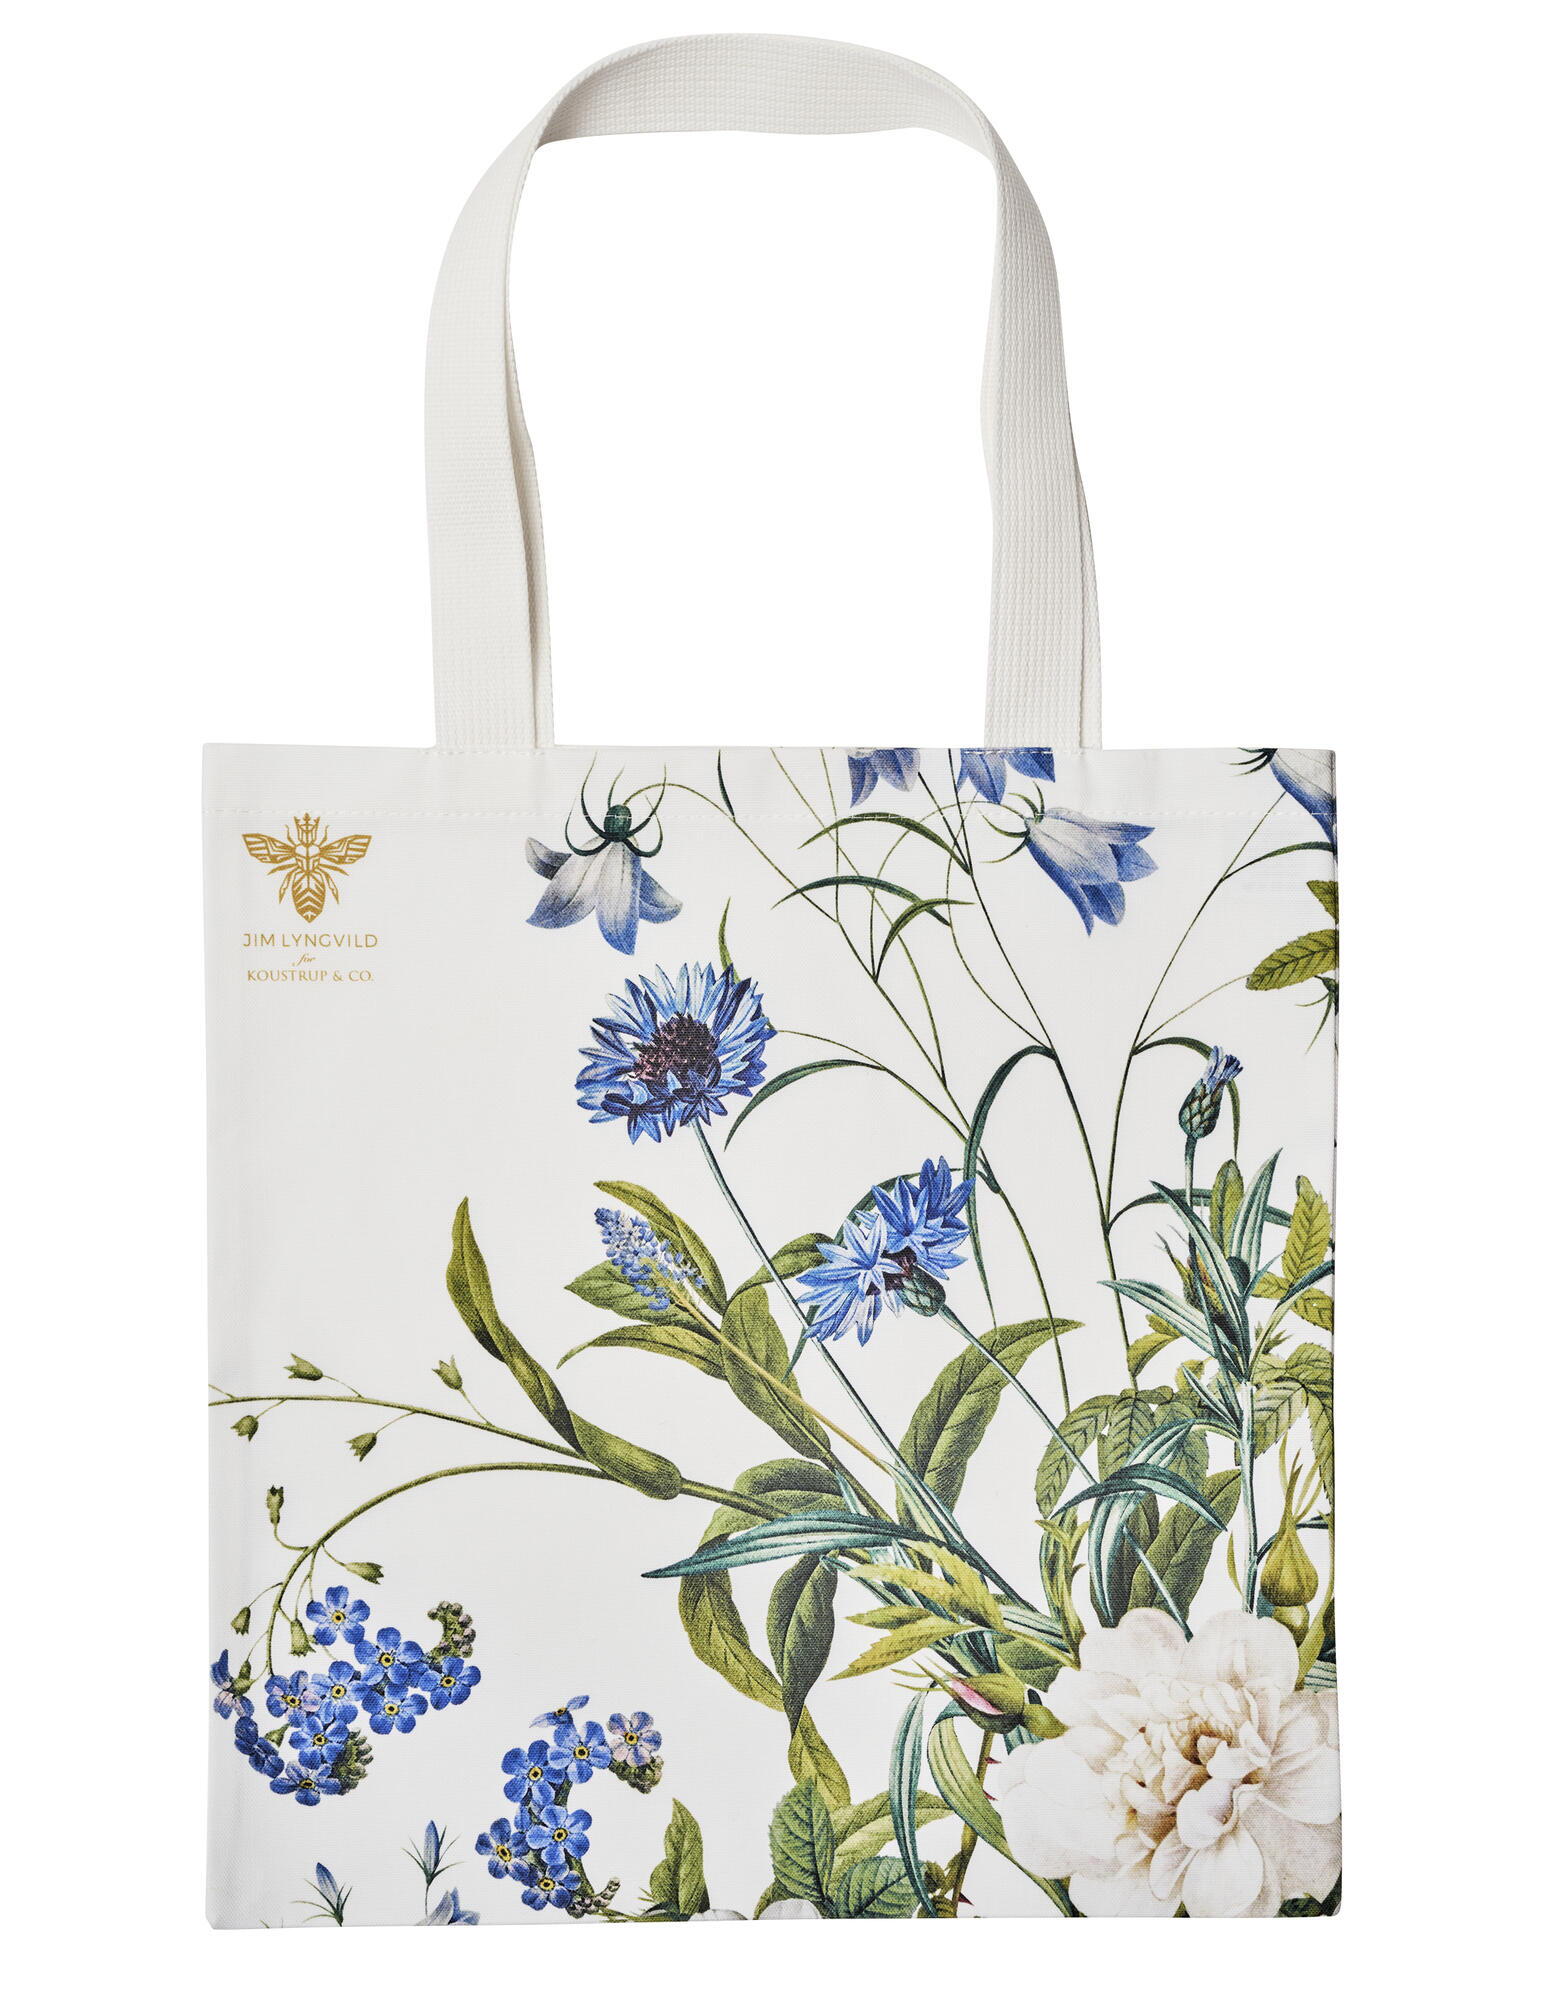 ORGANIC TOTE BAG - Blue Flower Garden JL, NEW PRODUCTS, €23.50, NEW PRODUCTS, Koustrup & Co., 5711612043839